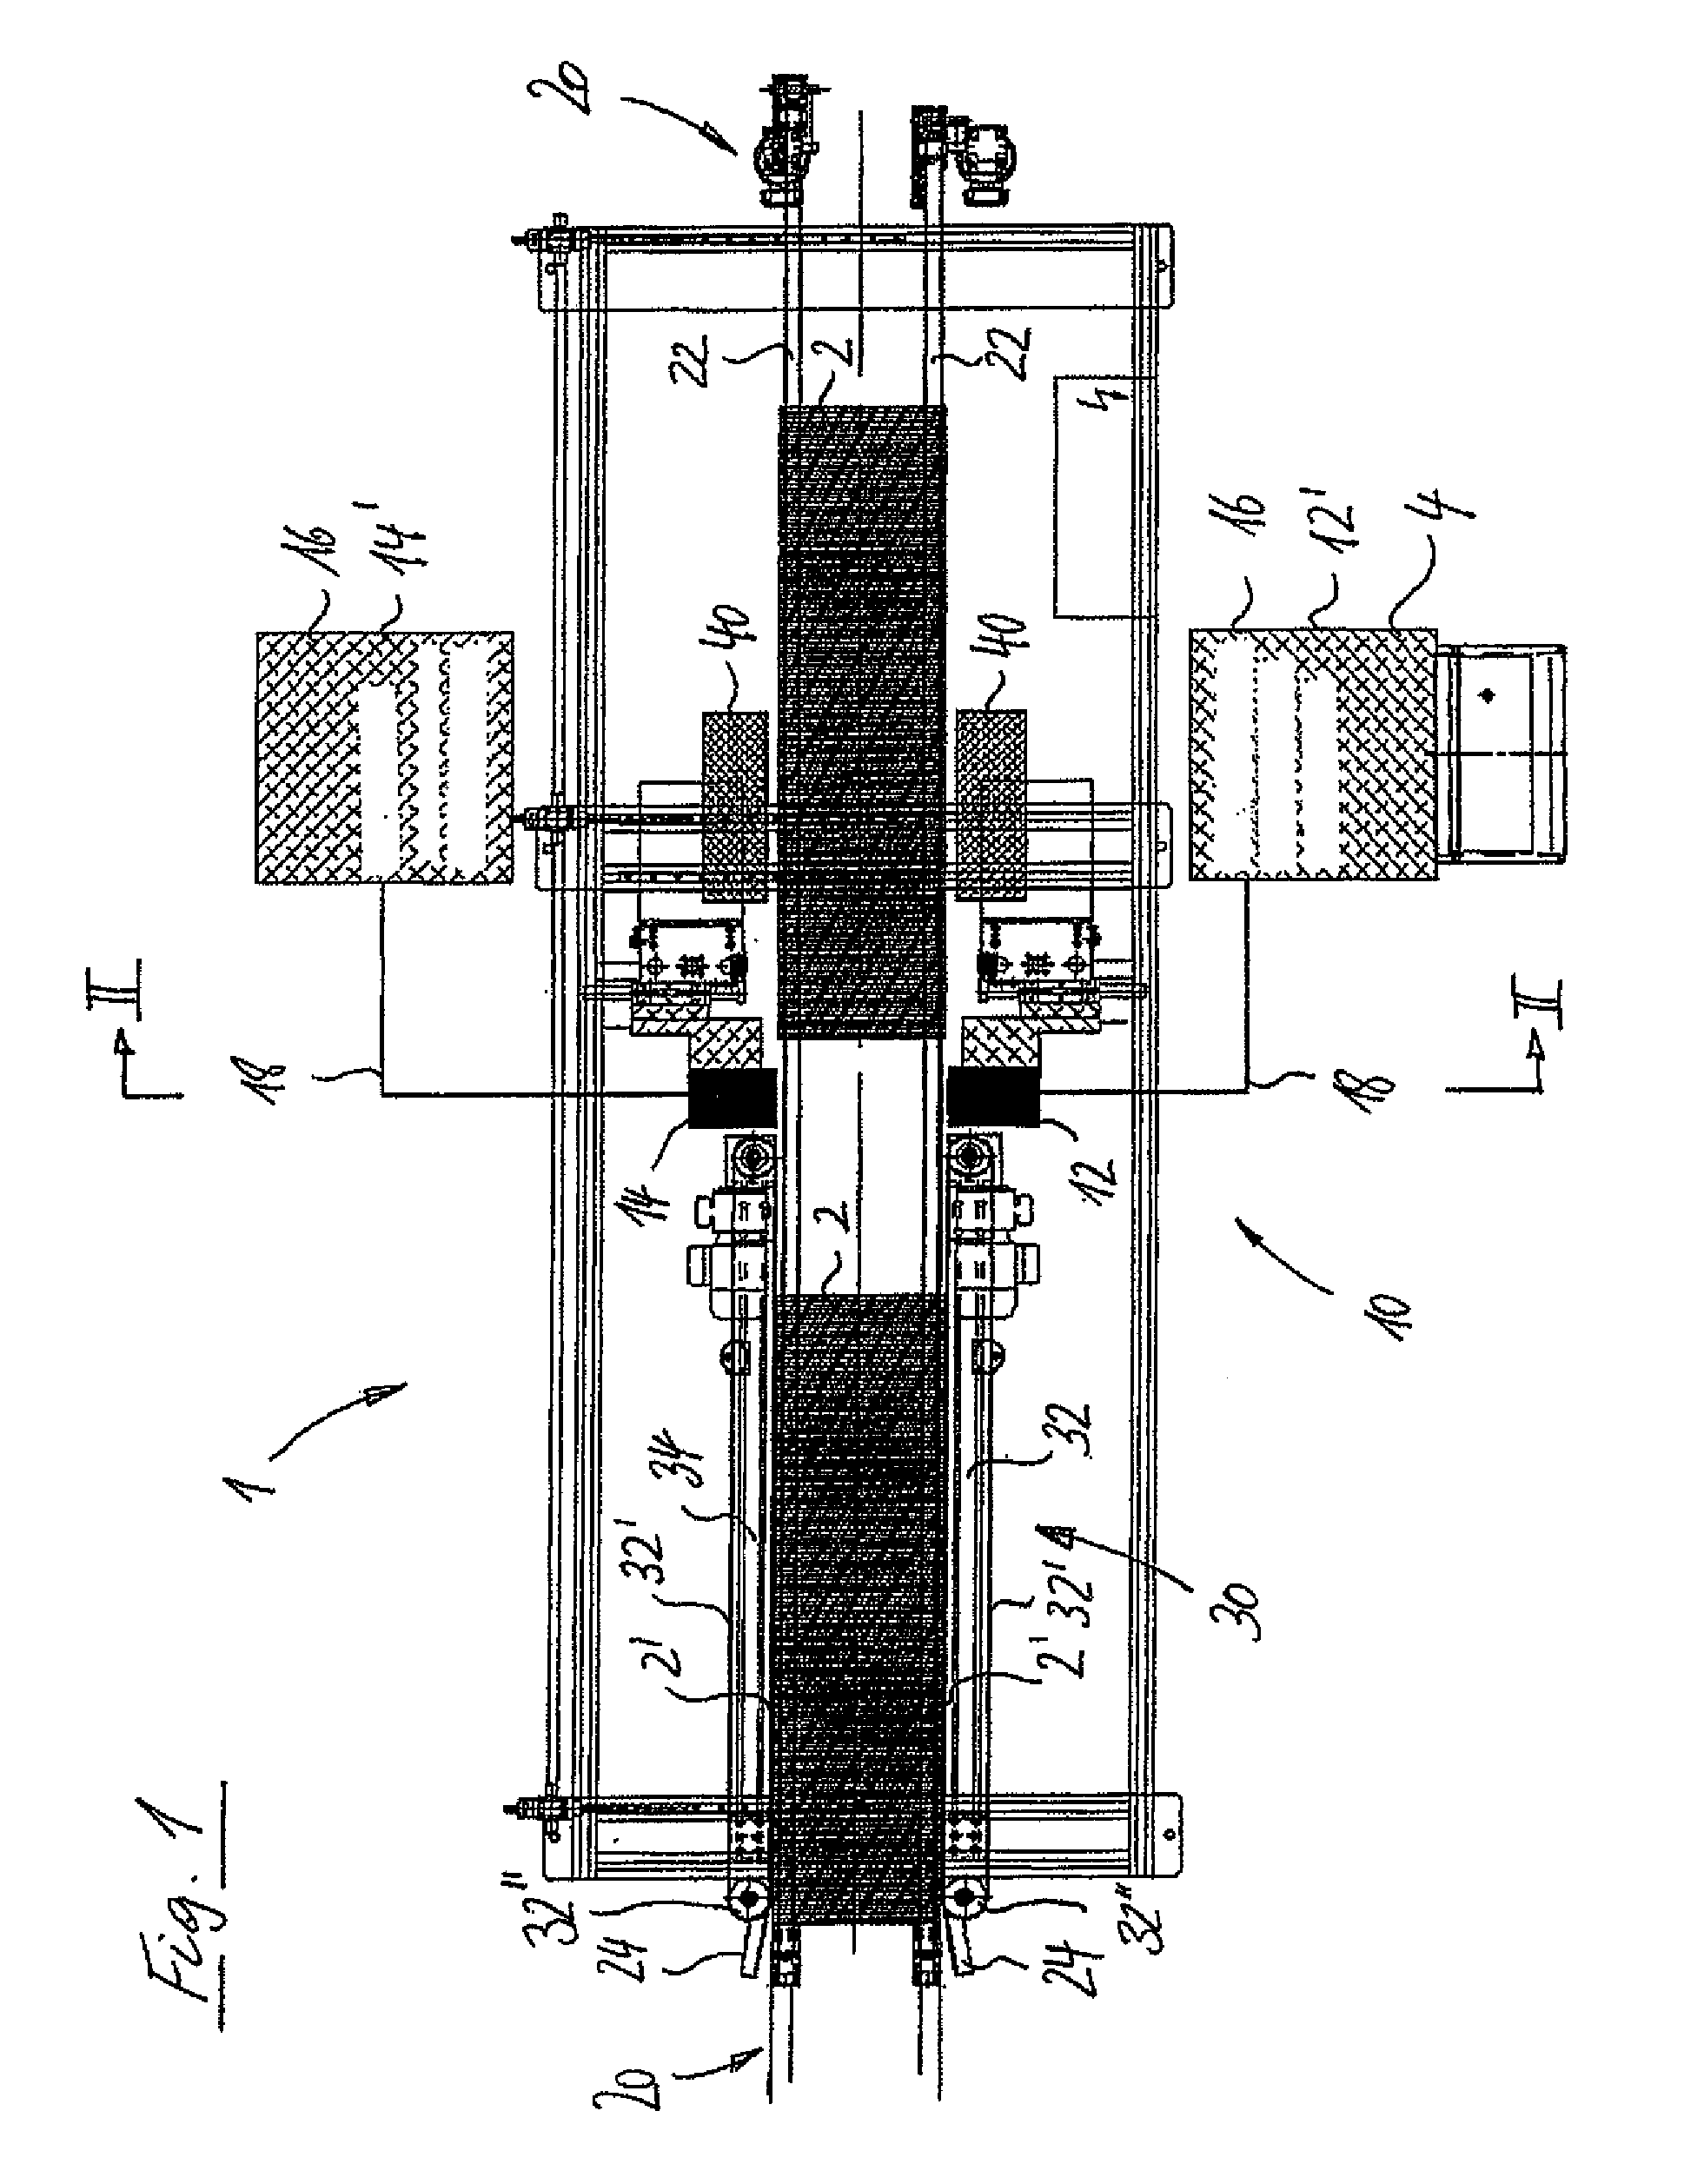 Method for imprinting a three-dimensional article